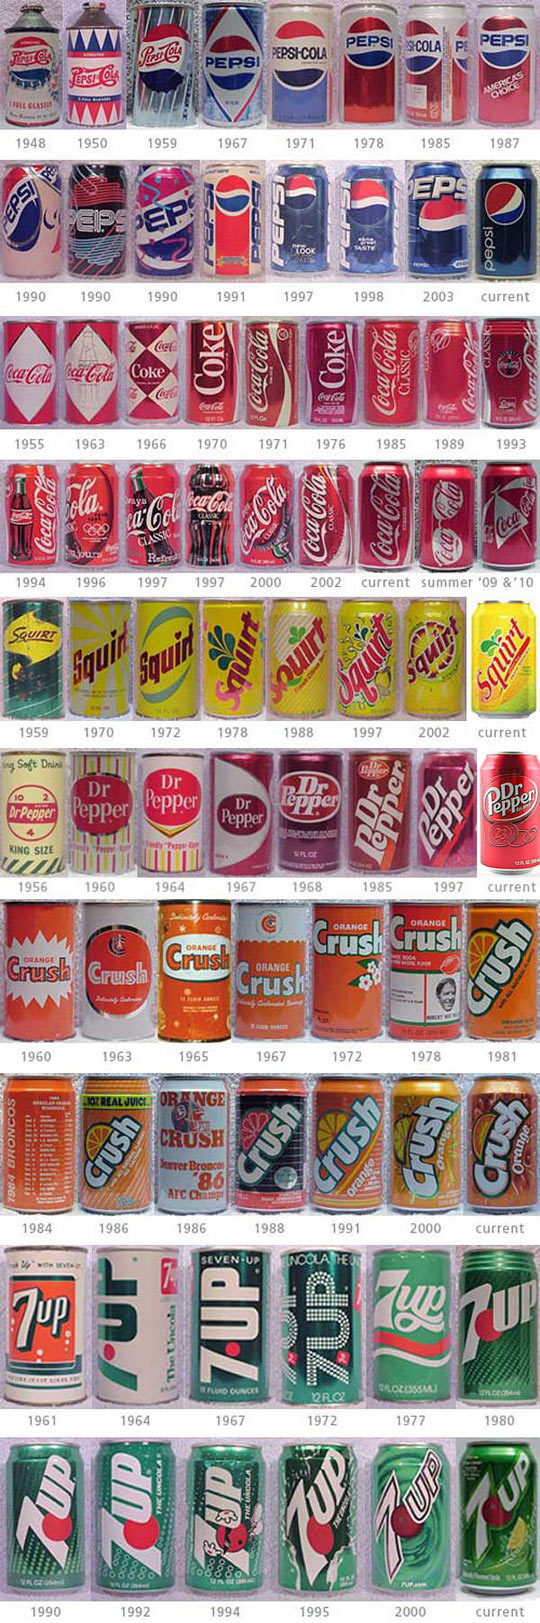 Soda through the ages